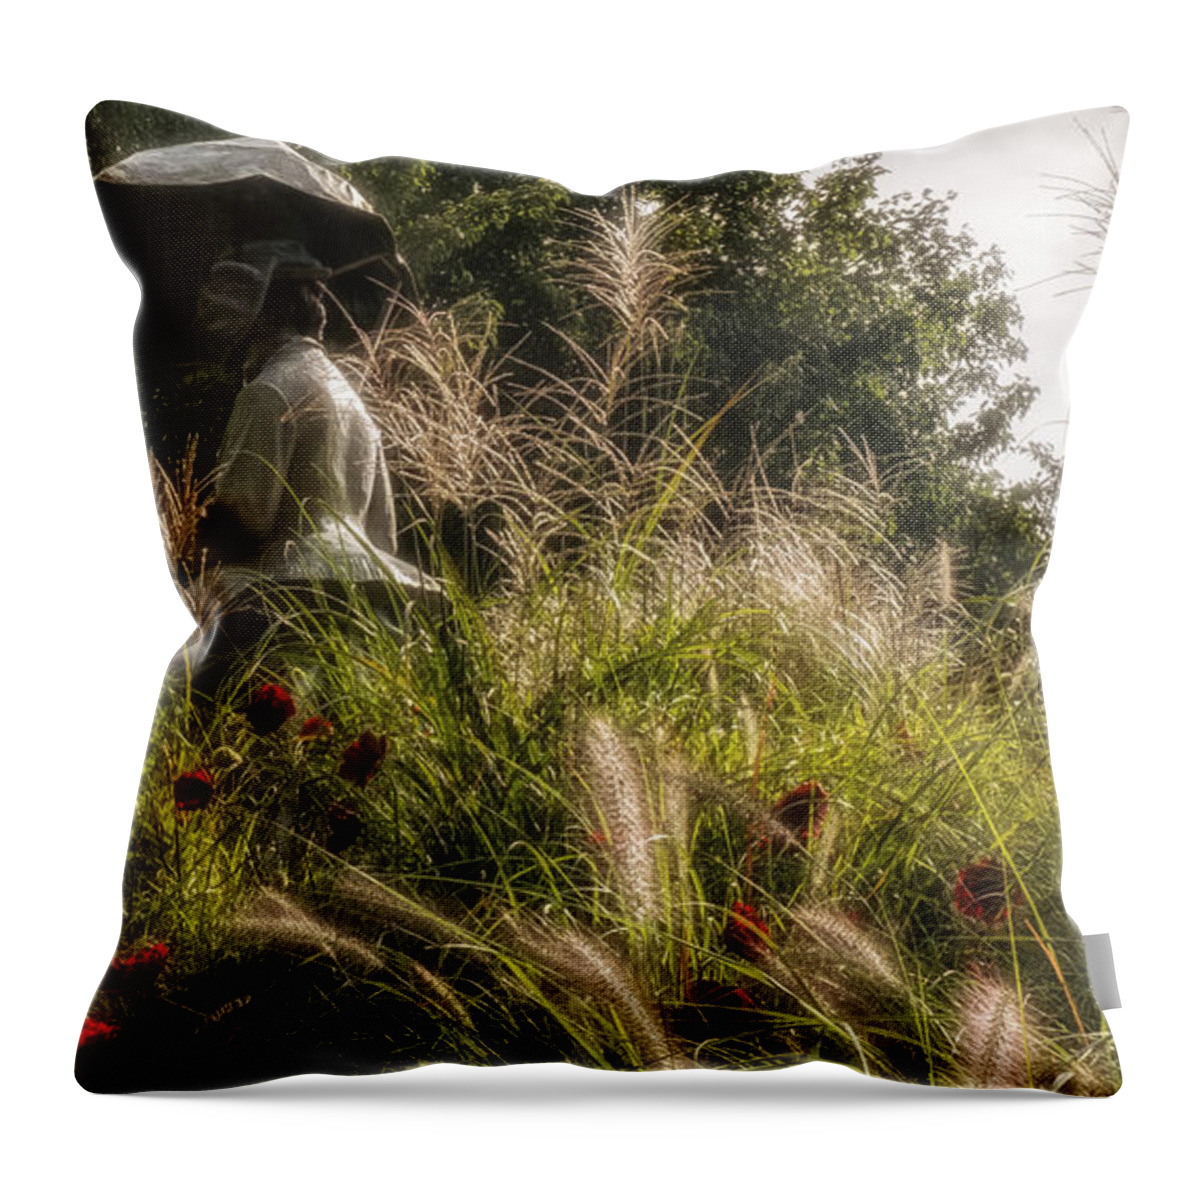 Grounds For Sculpture Throw Pillow featuring the photograph Day Dream by Glenn DiPaola